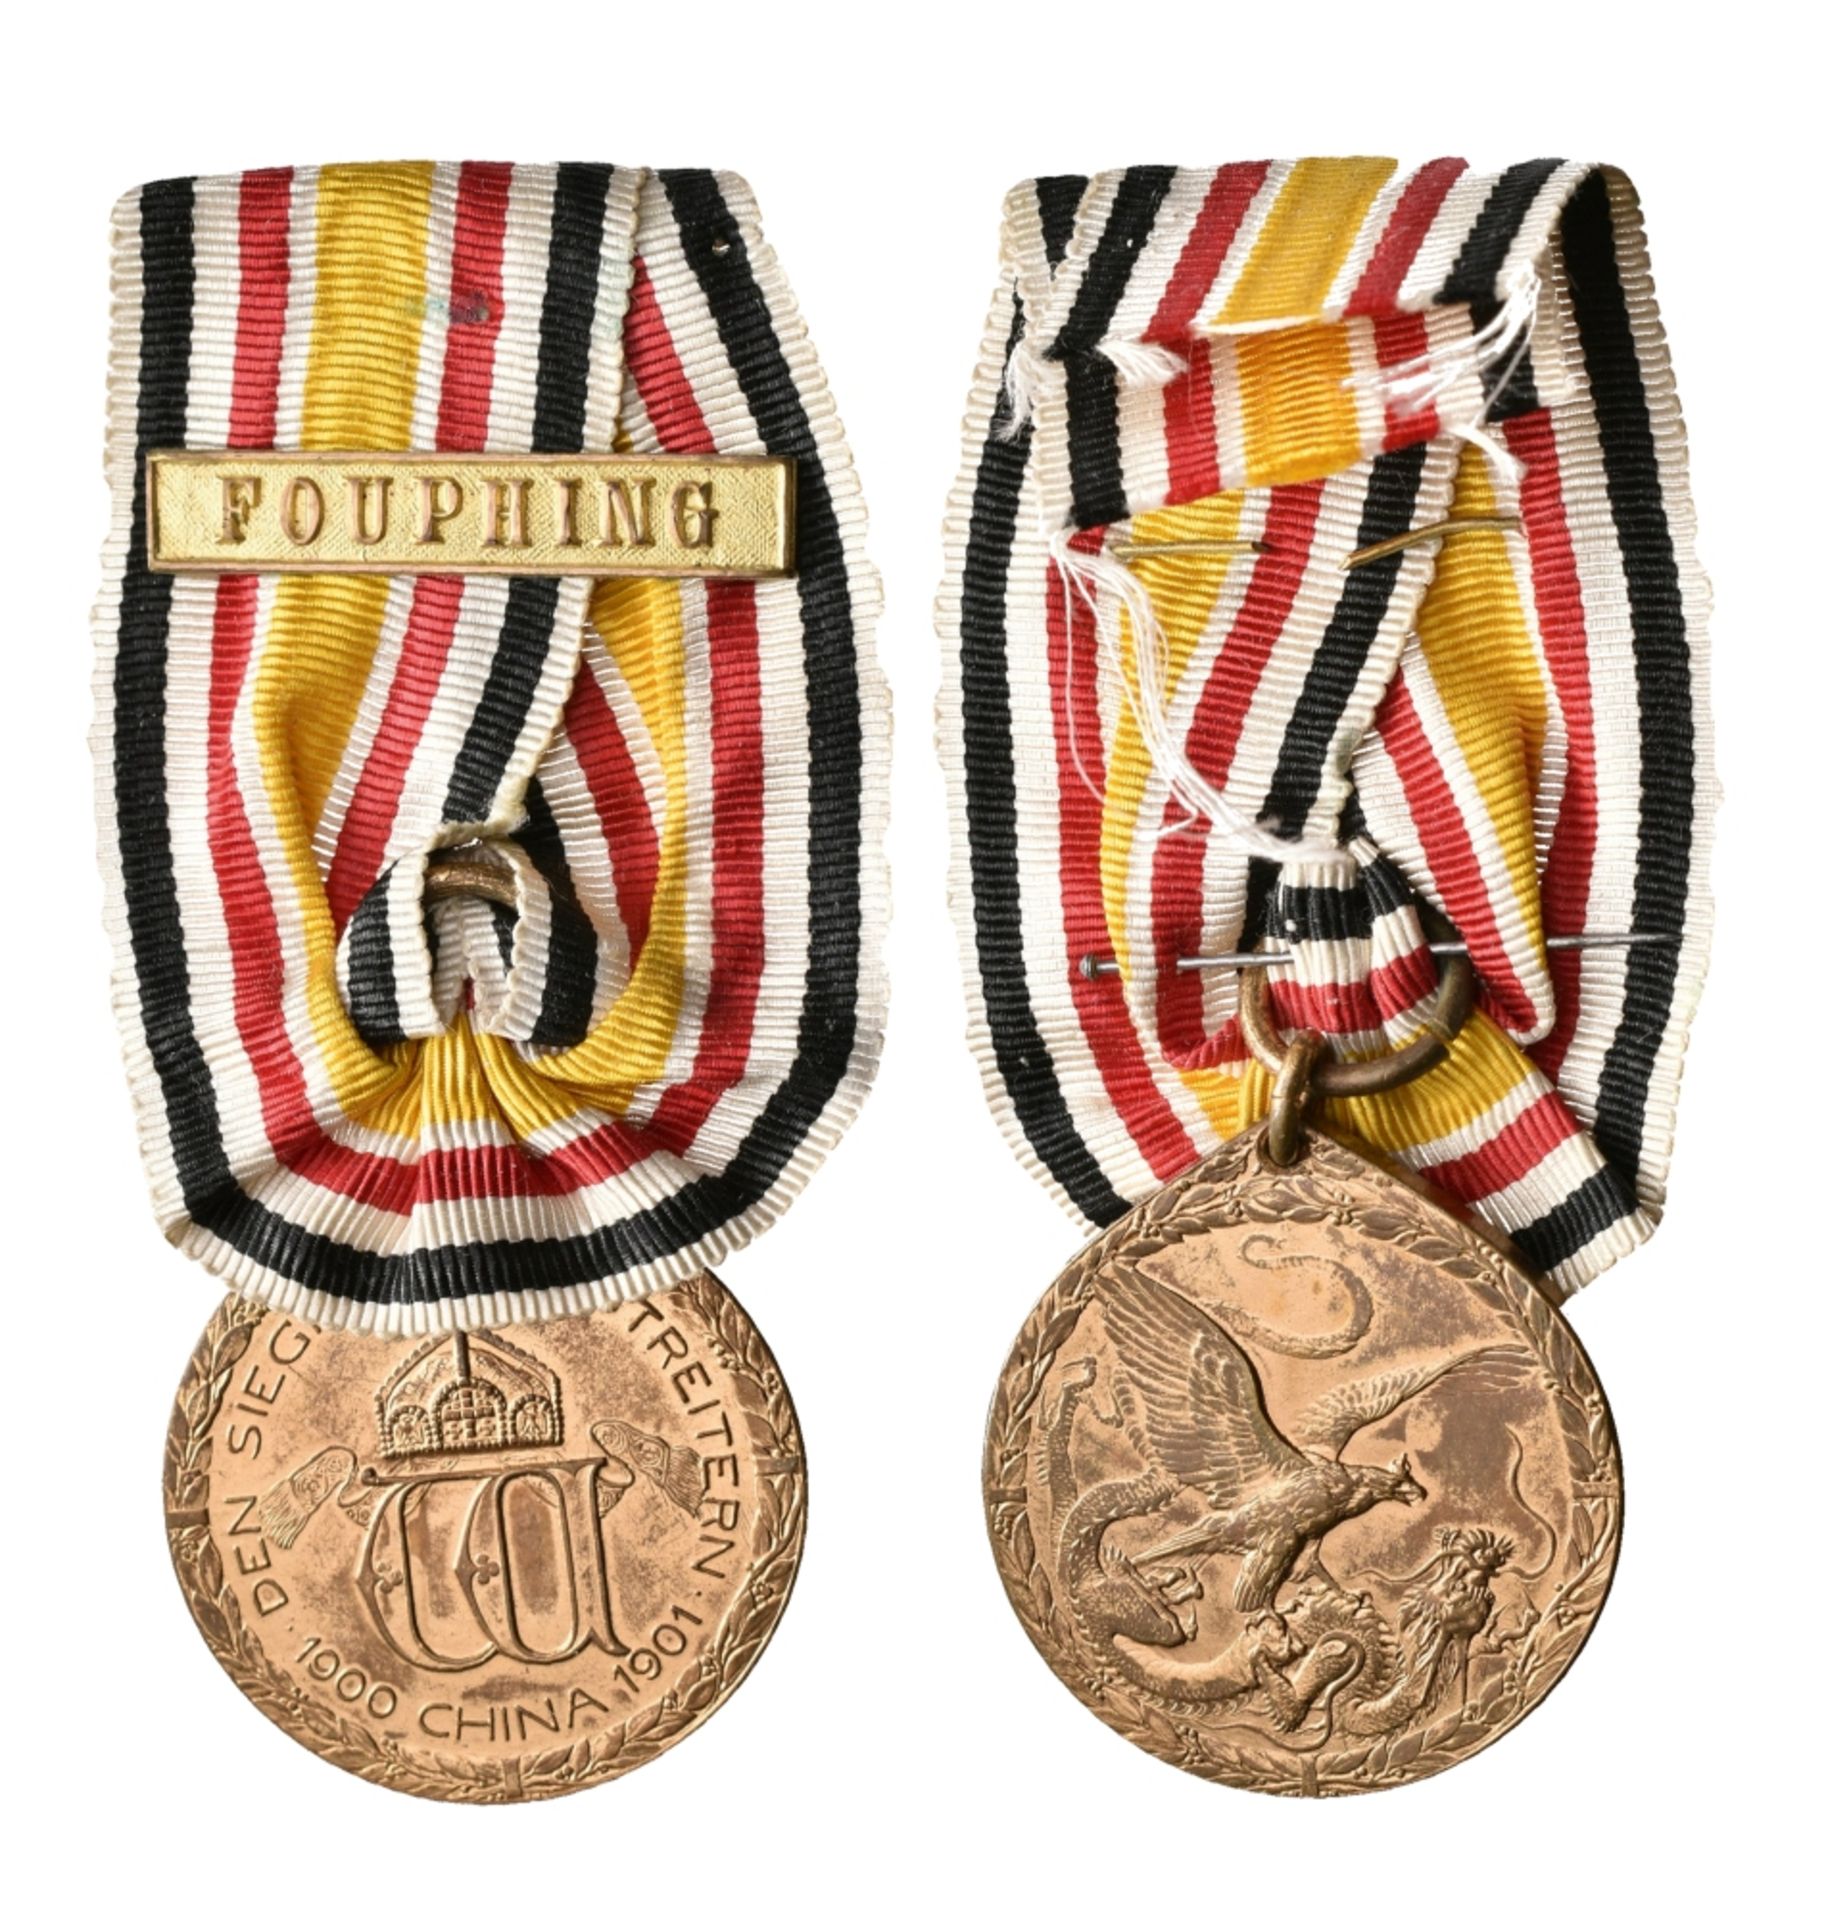 China commemorative medal for fighter (1901), copper gold plated, at the volume with bracketed